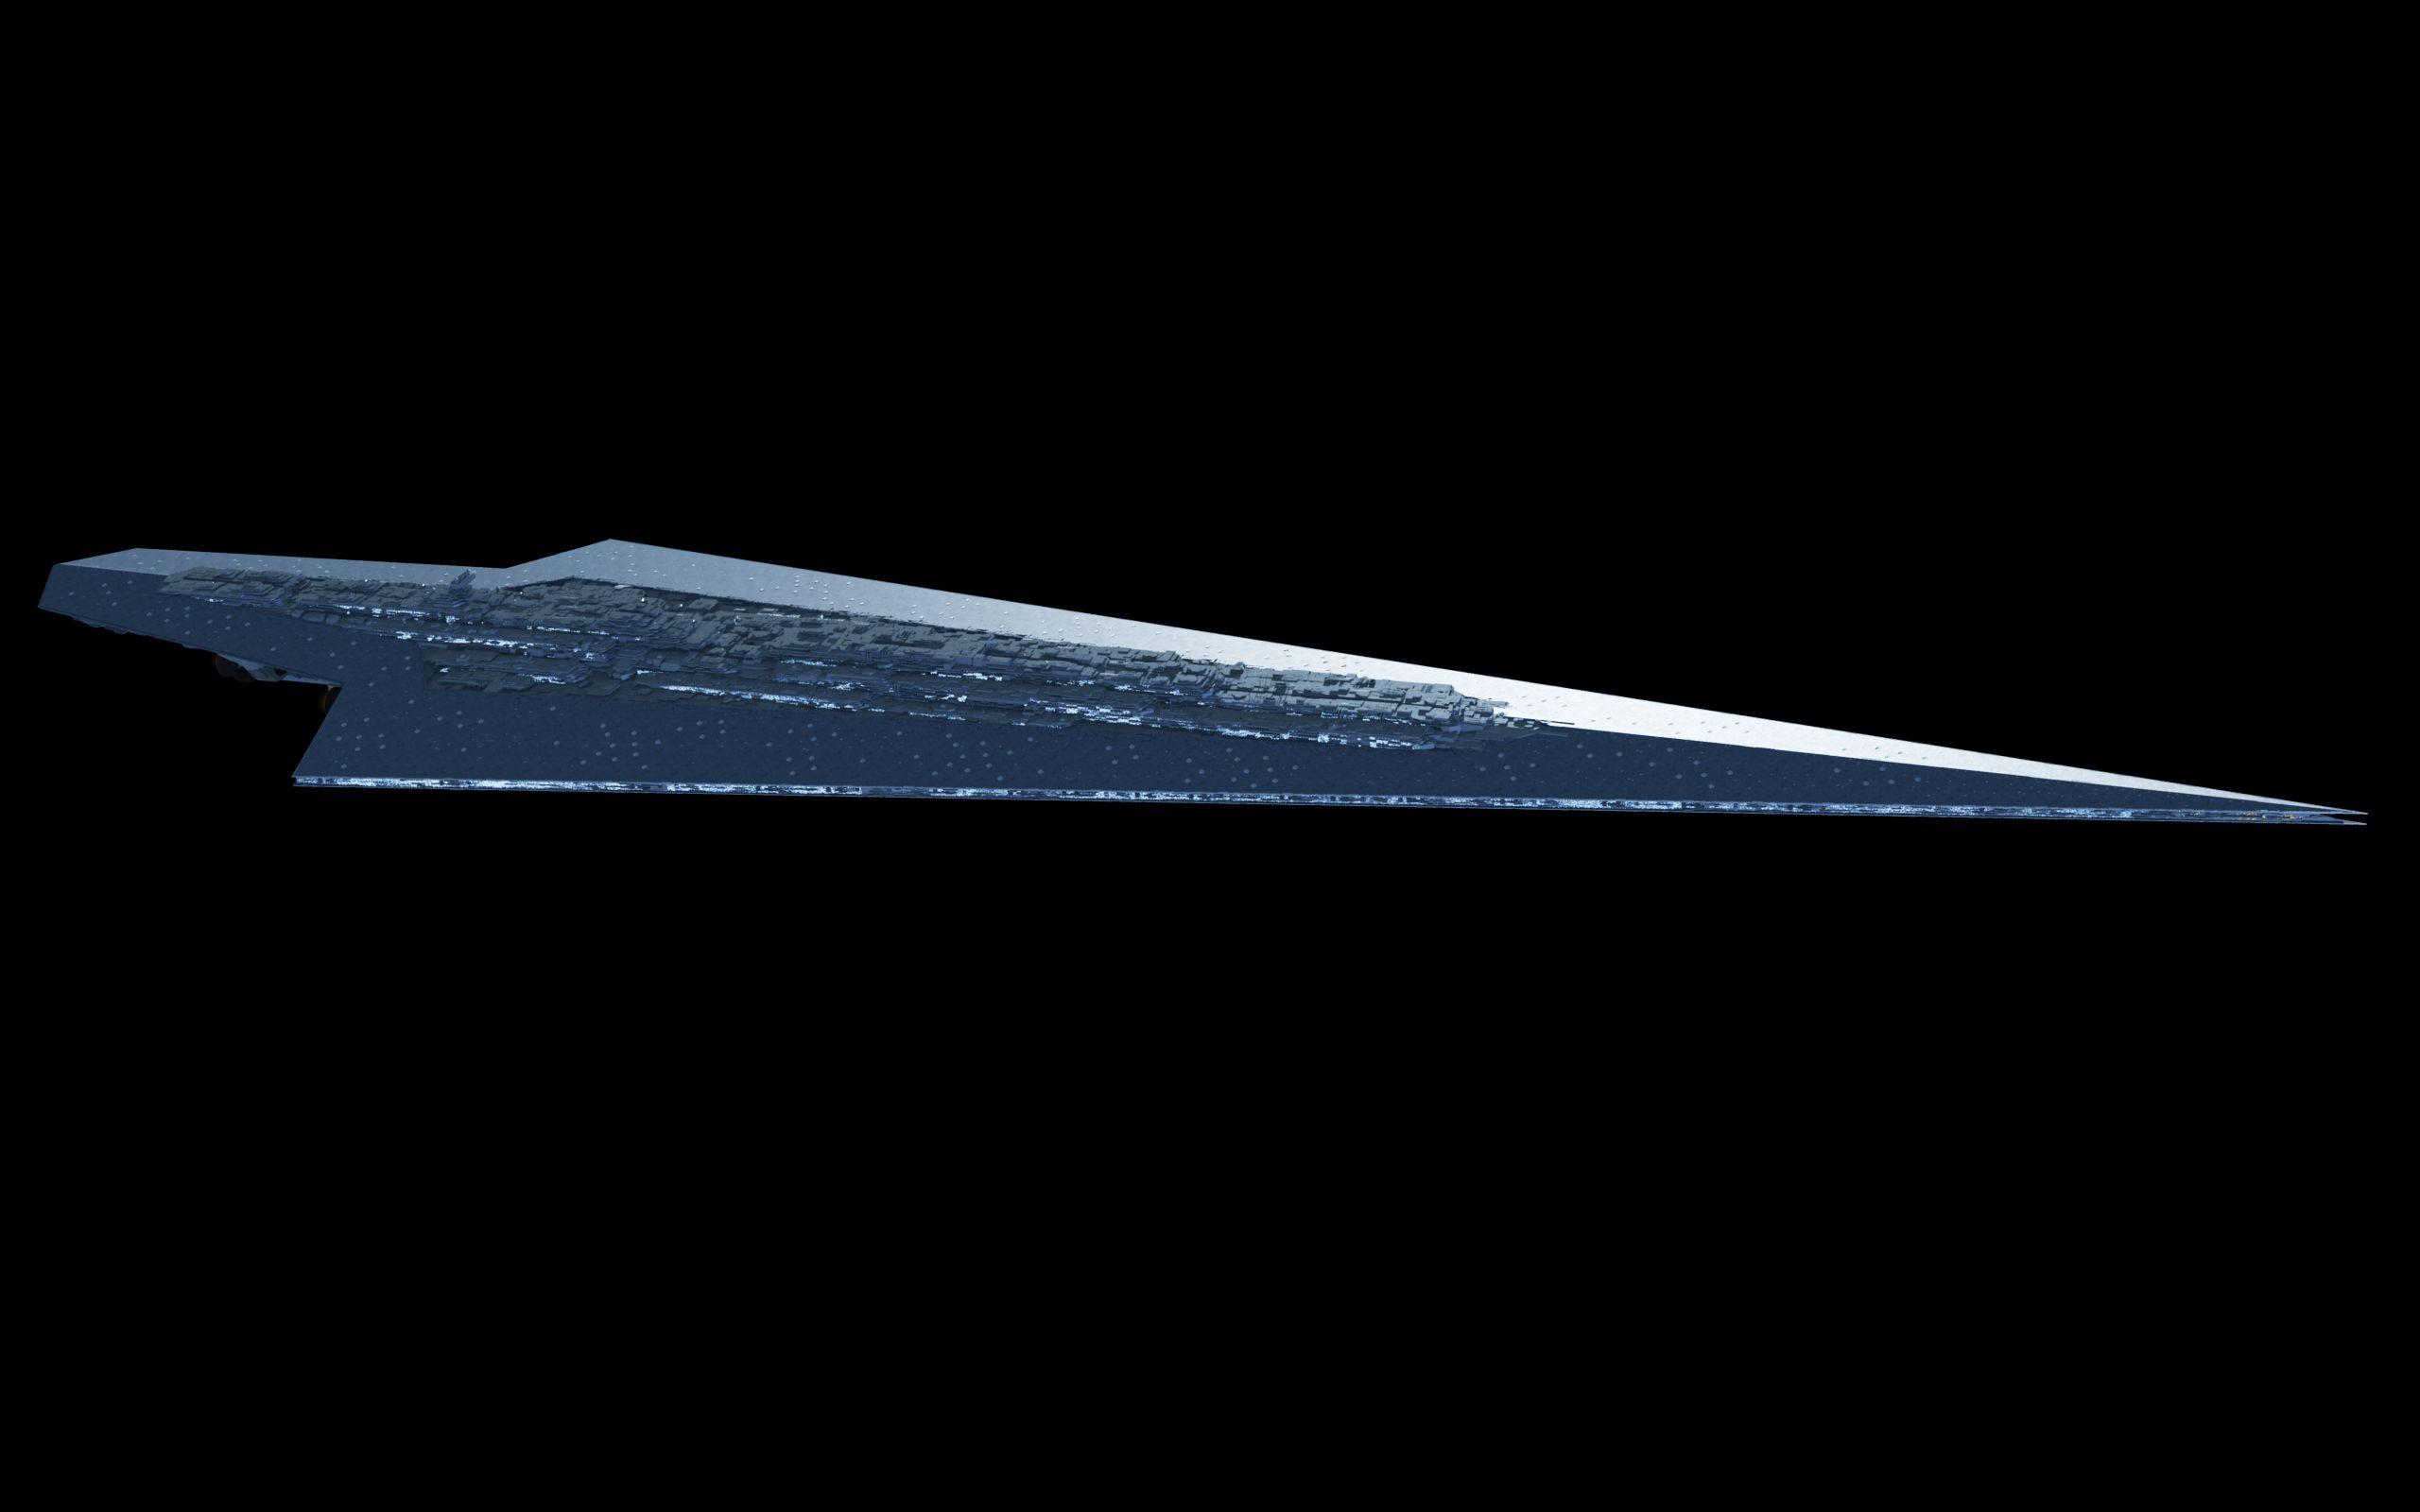 2560 × 1600 Star Destroyer Wallpaper. So, this is what I&;m thinking